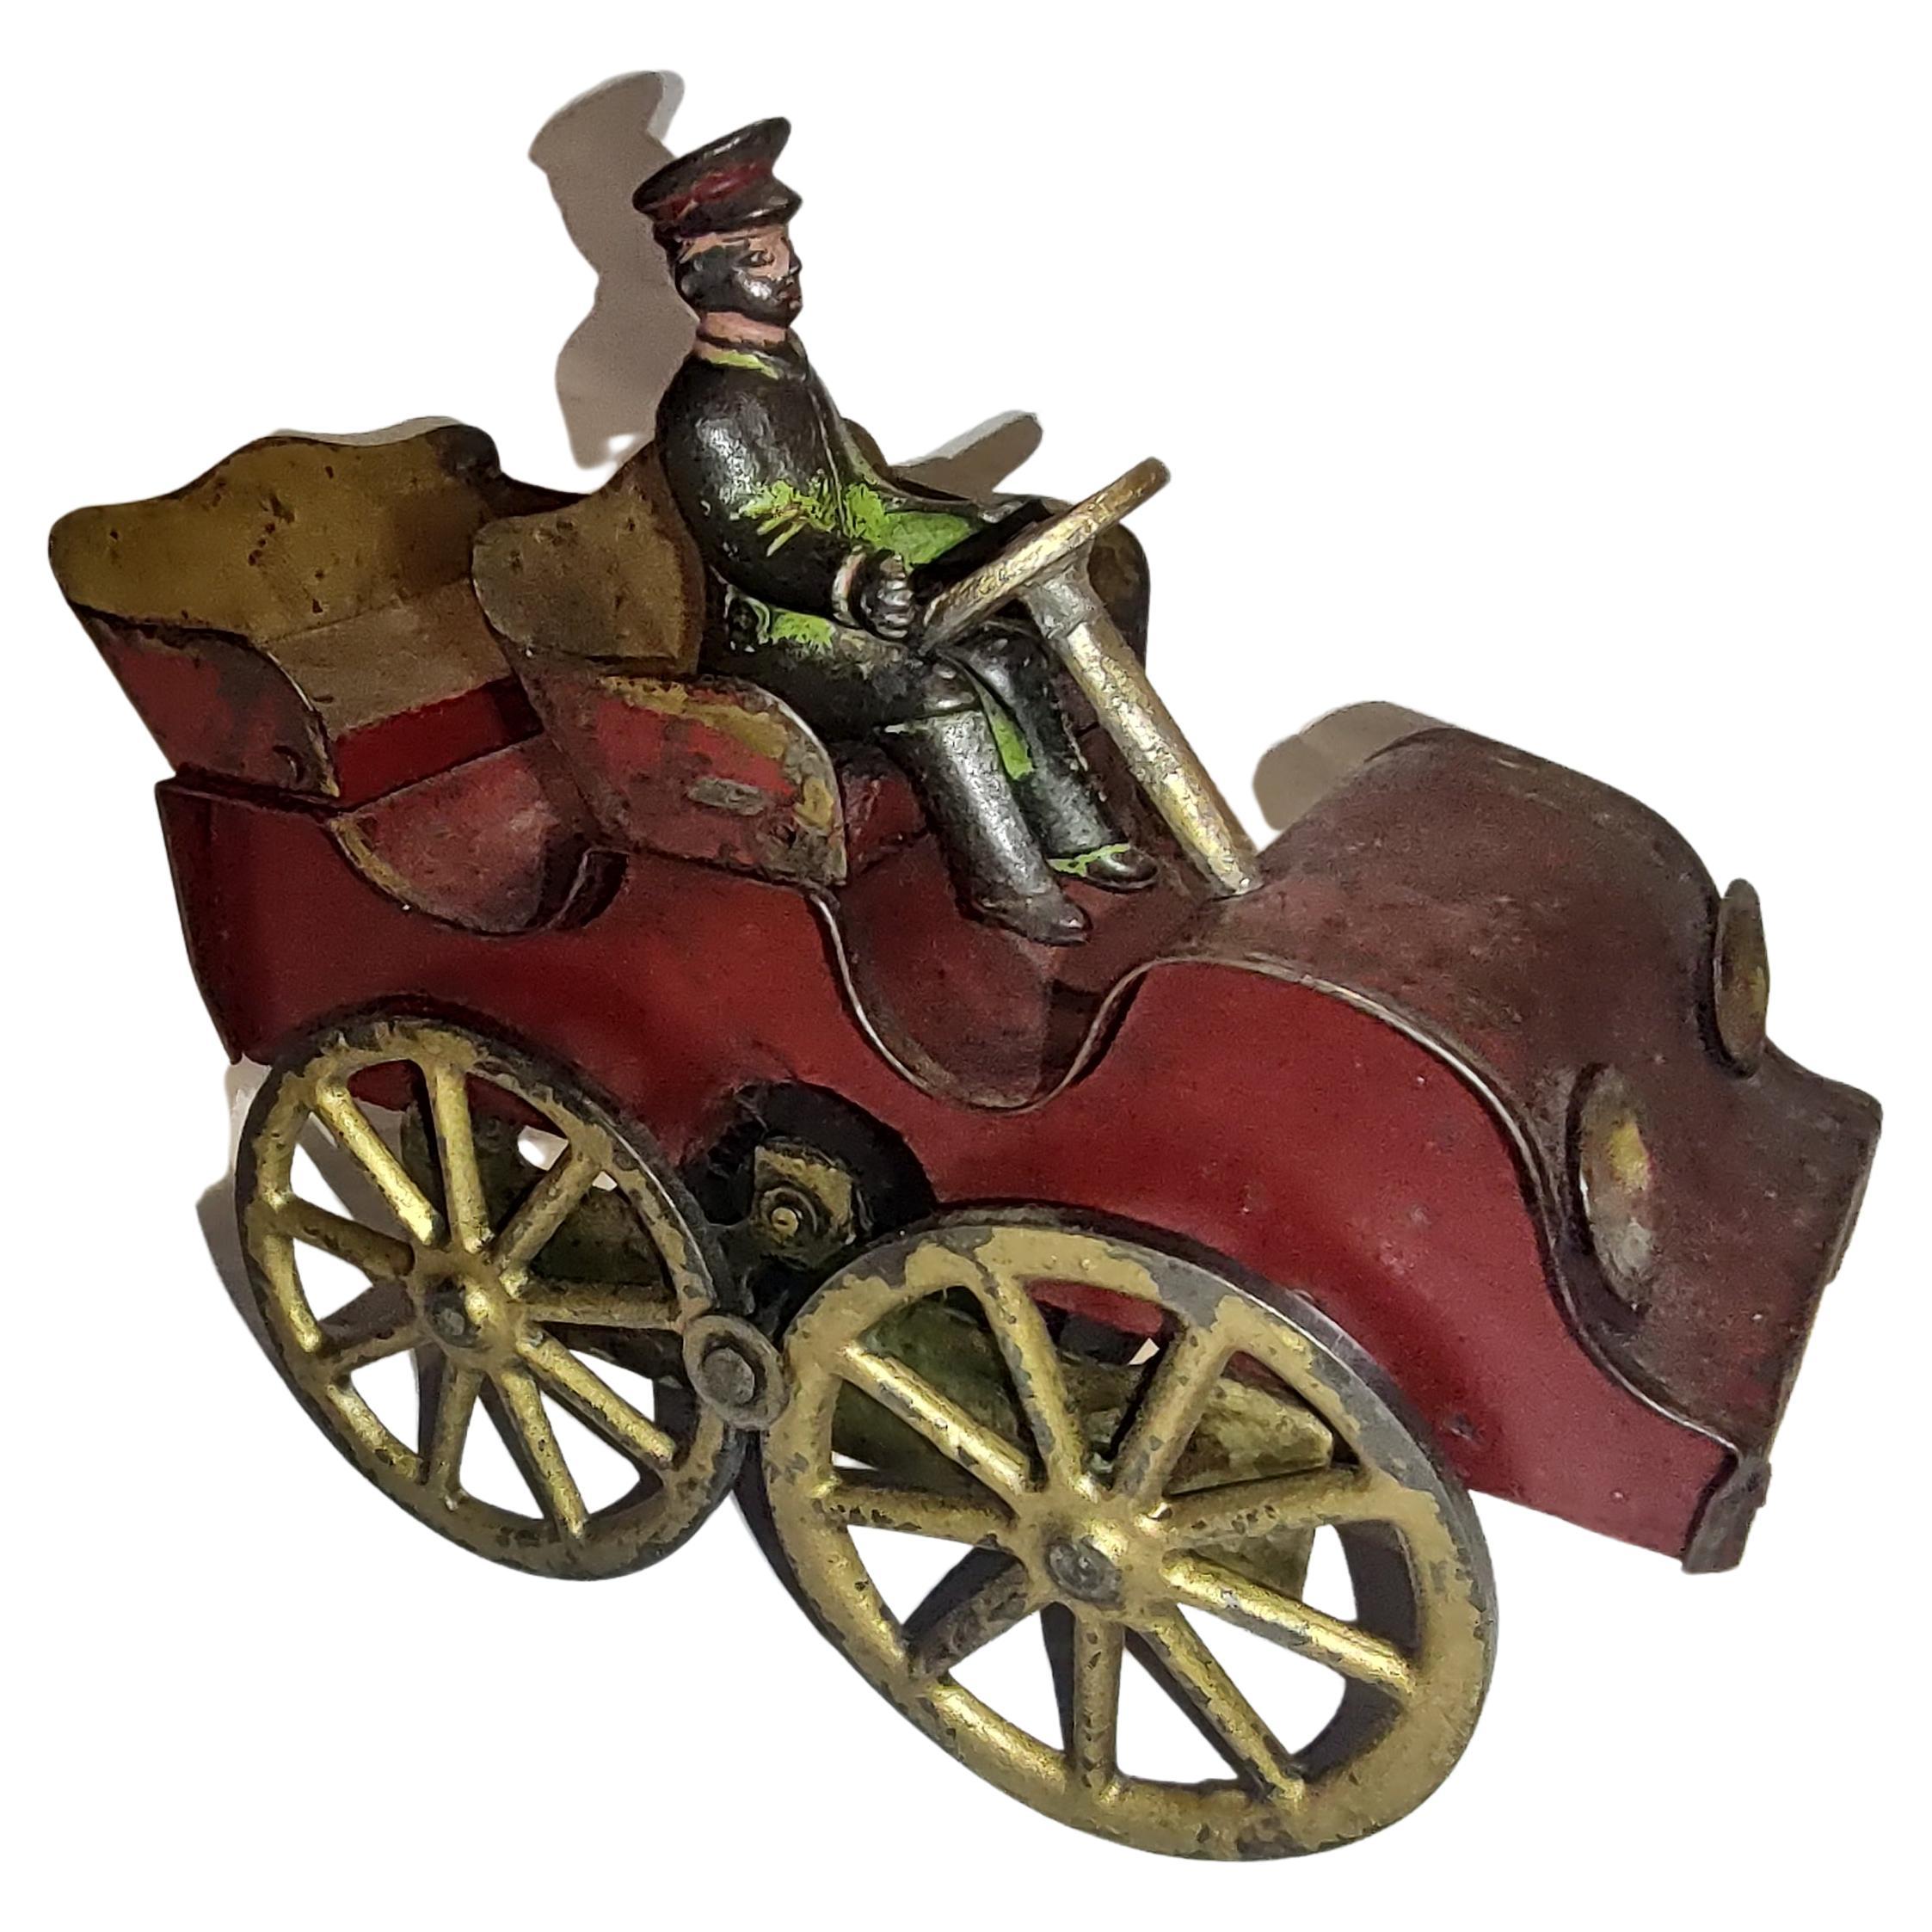 Tin Toy Car - 22 For Sale on 1stDibs | buy tin toy cars, vintage 